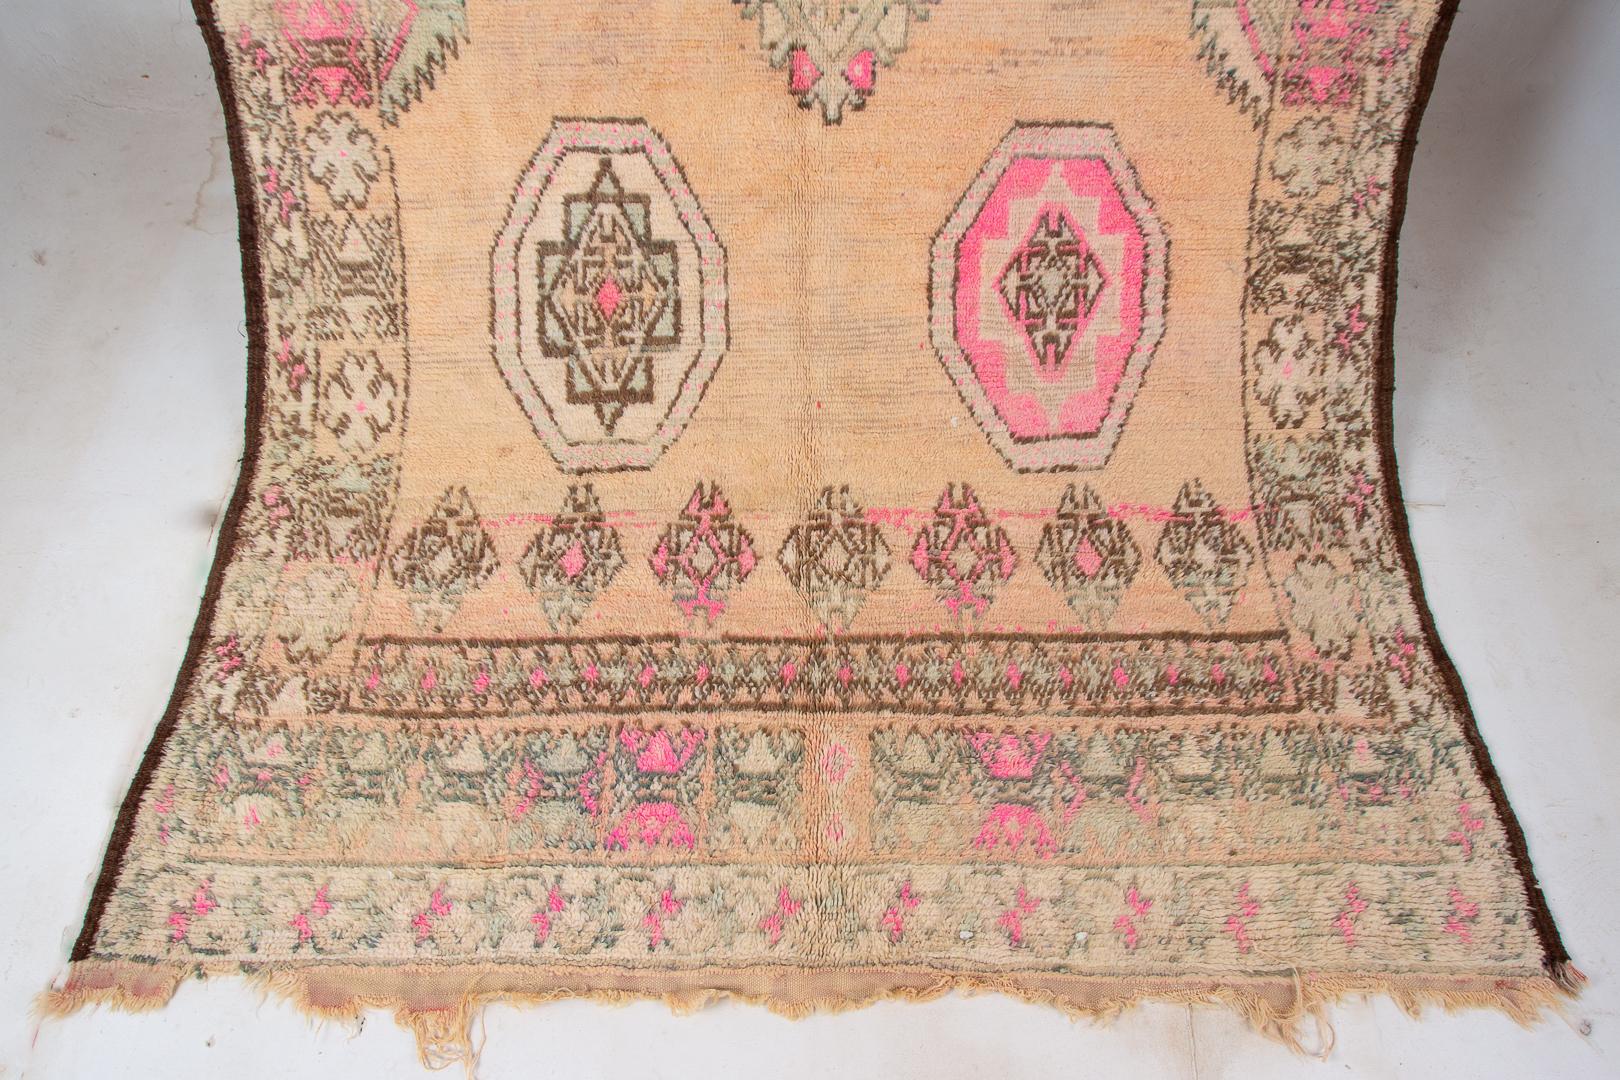 Step into a different era with this Flat Vintage Moroccan Berber Boujad rug dating back to the 1950s. Its tribal design opens a window into the past, capturing the essence of tradition and culture. The faded pink and light red hues have aged